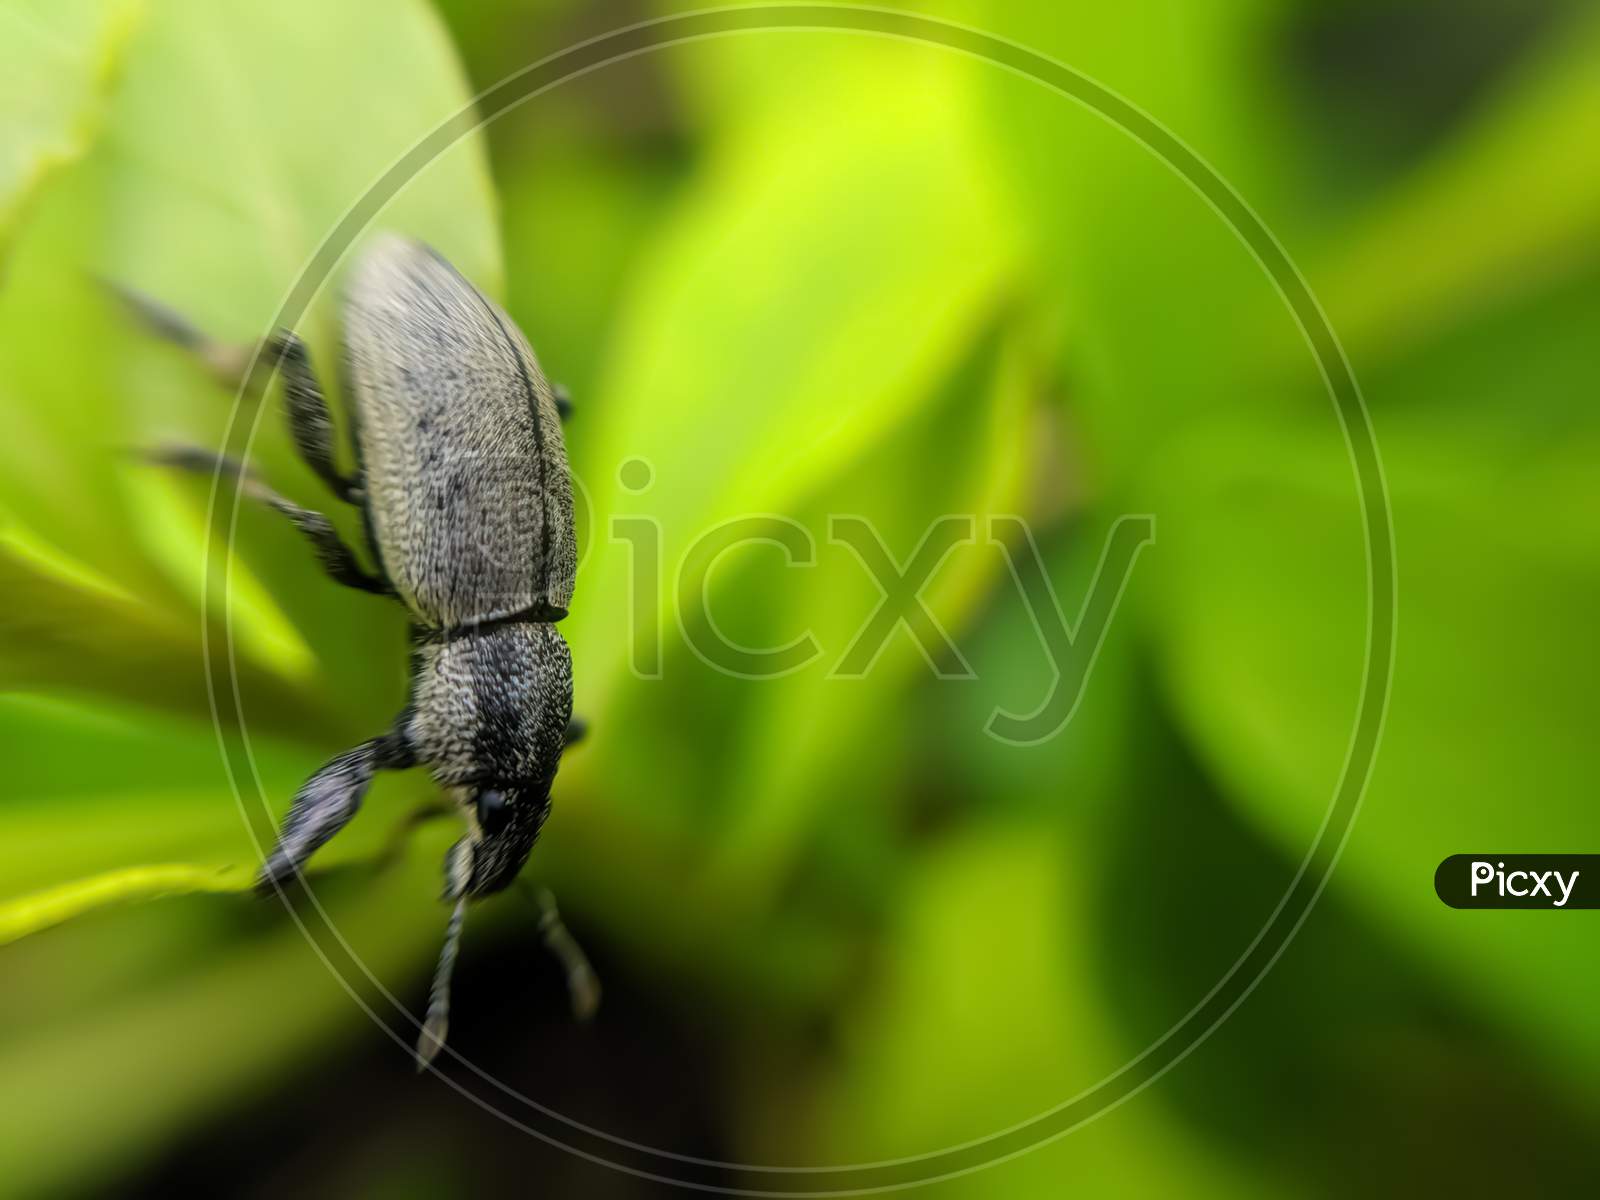 Curculionoidea insect on leaf garden curculionoidea green leaves plant to sit weevils